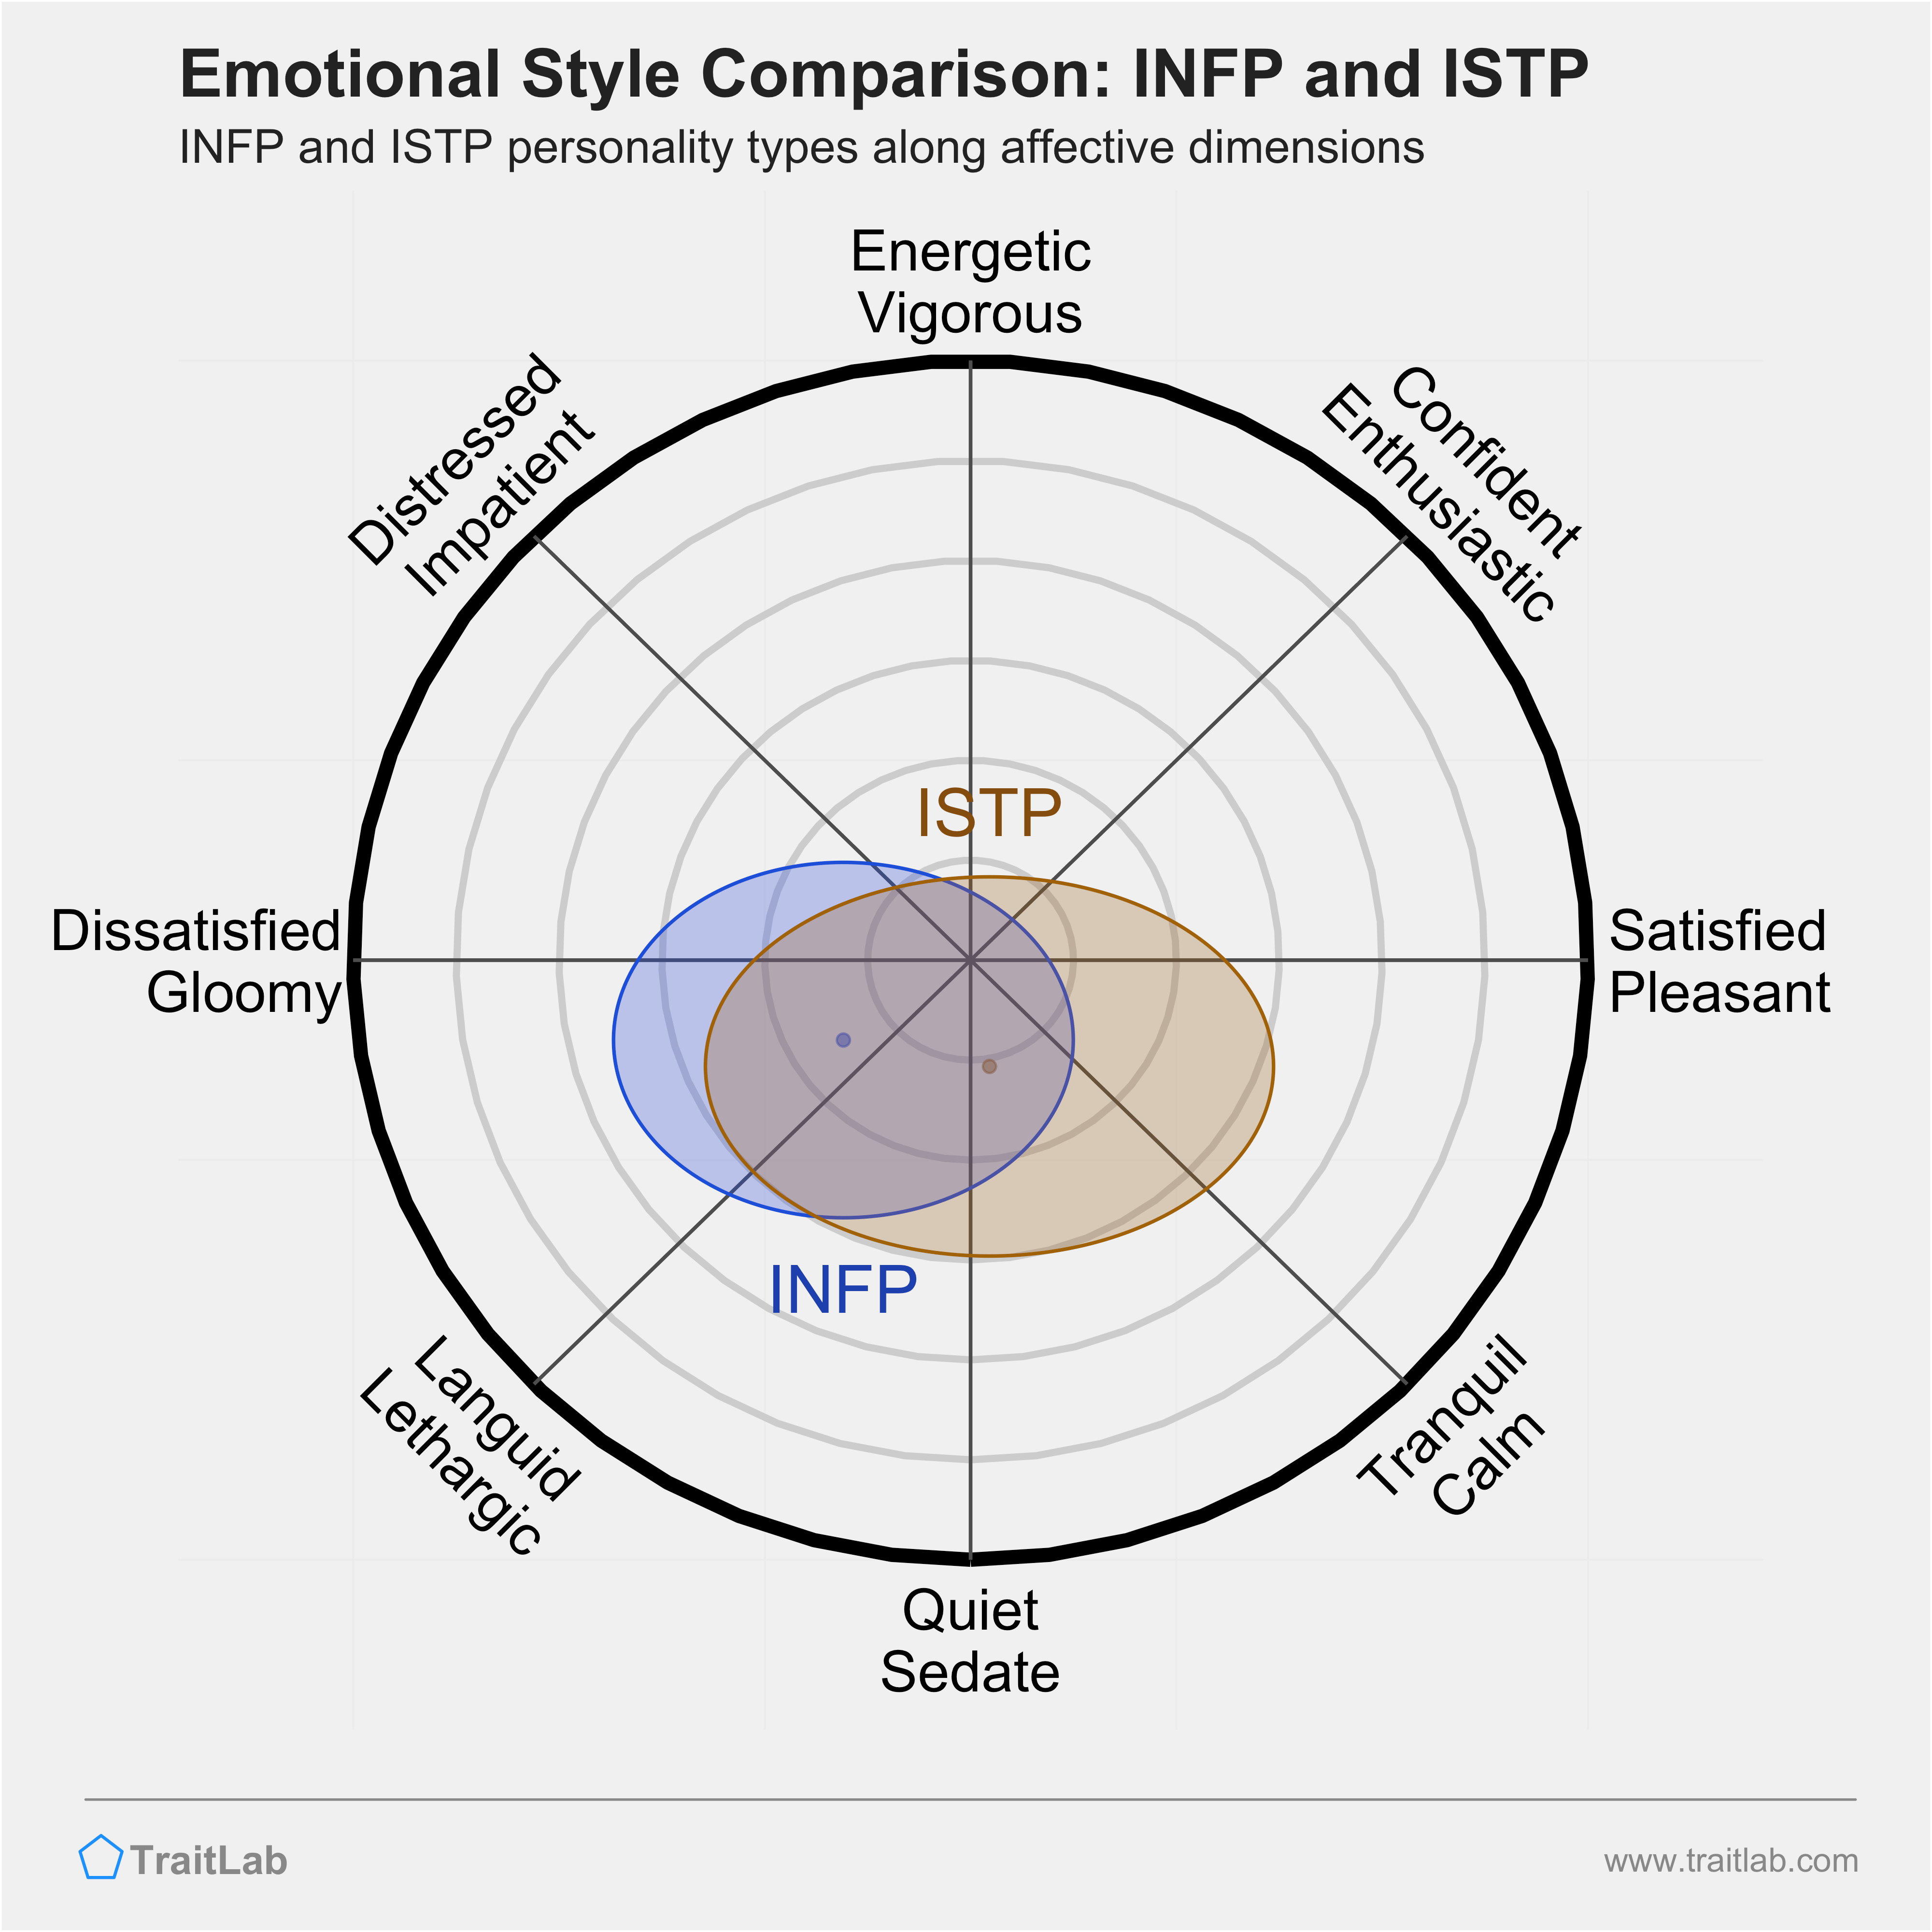 INFP and ISTP comparison across emotional (affective) dimensions